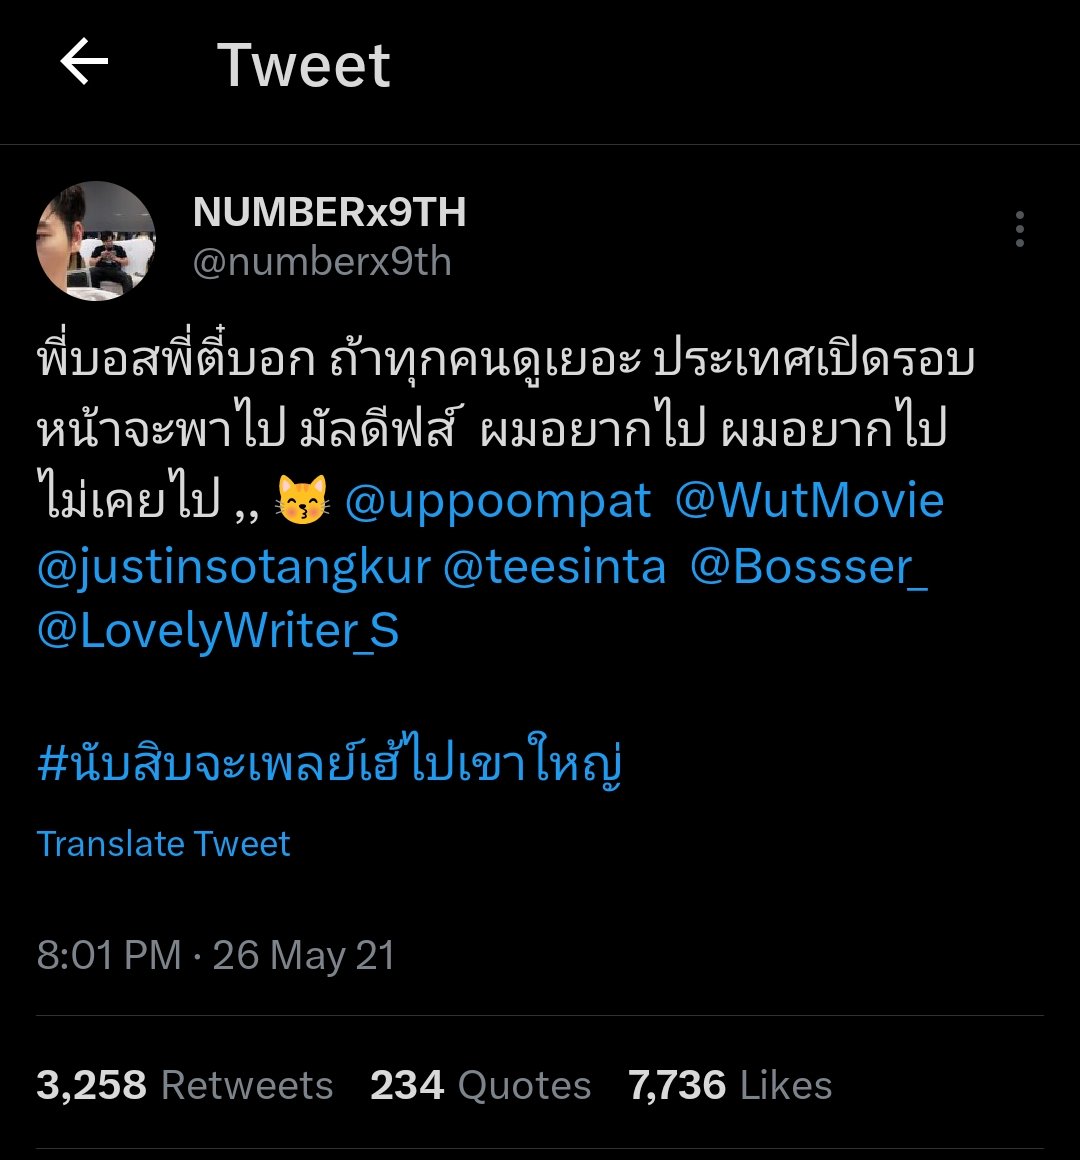 I see some bunch of delulu ghostshippers are overly excited of 'Kissing Emojis'. 
Here is bunch of kissing emojis which KaoUp shared with each other 😗😽🖤🤍

Bruh, you can't be level of KaoUp. 😎🖤🤍

#กั๊พอ้าว #เก้าอัพ
#KupAo #KaoUp
#number_9th #uppoompat